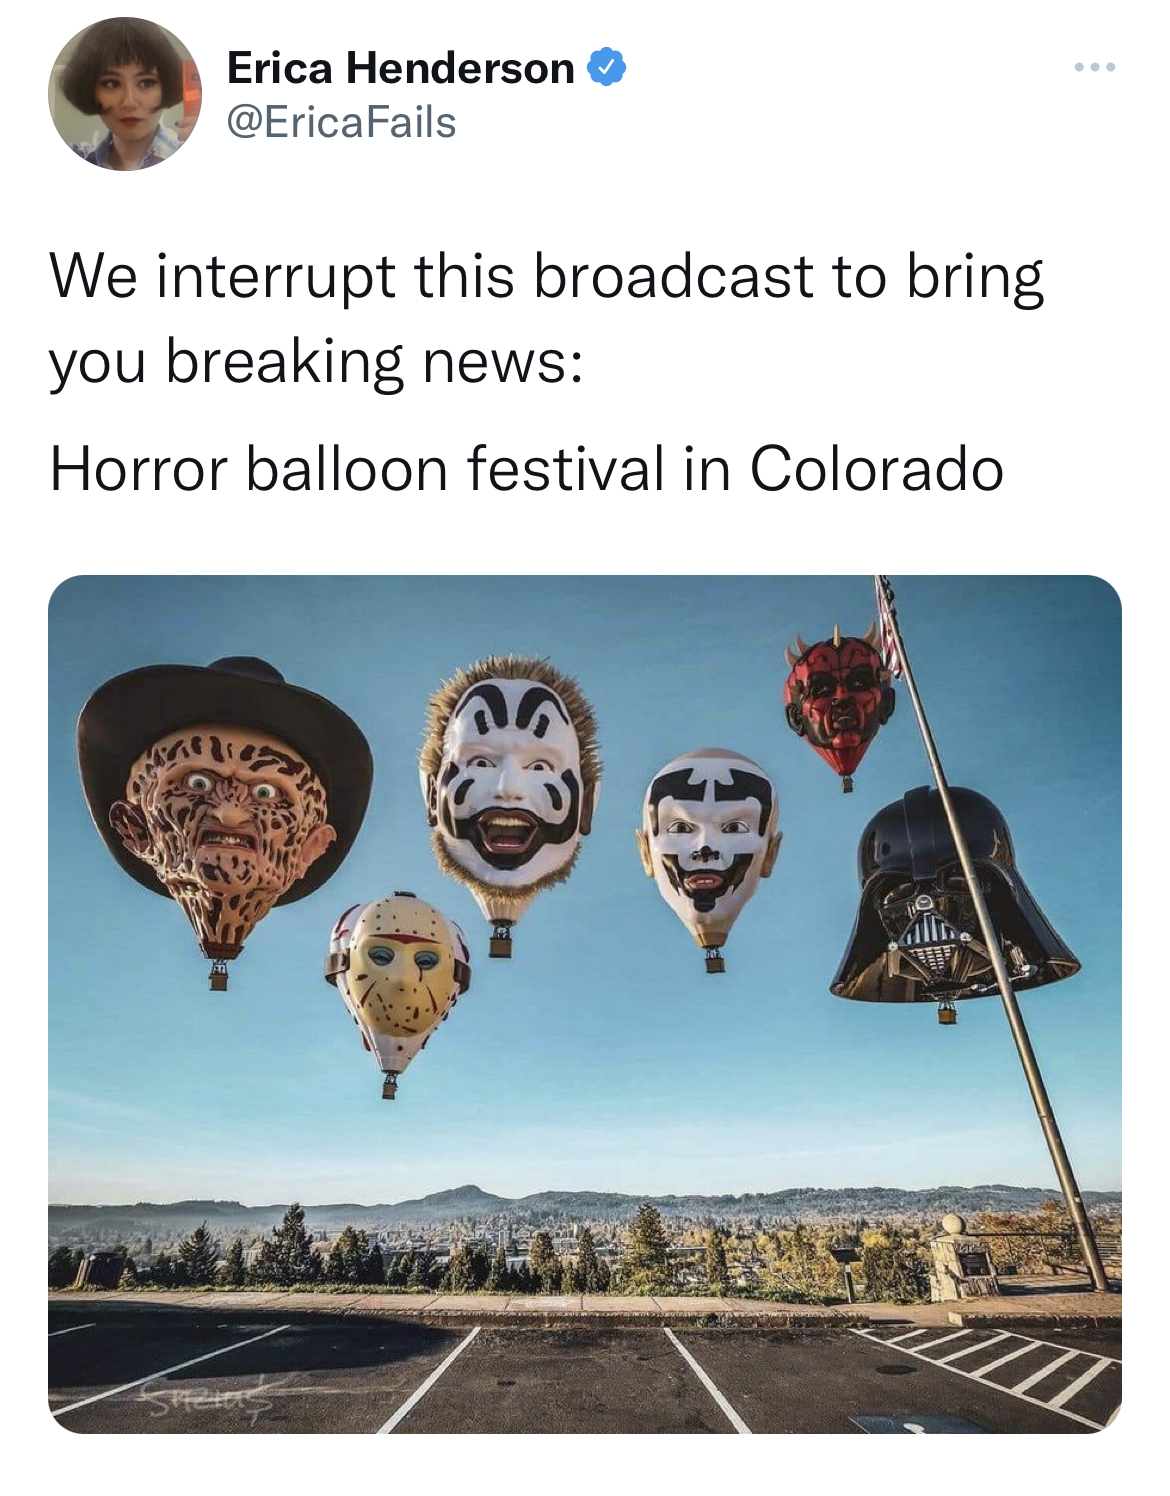 horror themed hot air balloons - Erica Henderson We interrupt this broadcast to bring you breaking news Horror balloon festival in Colorado Te alin.